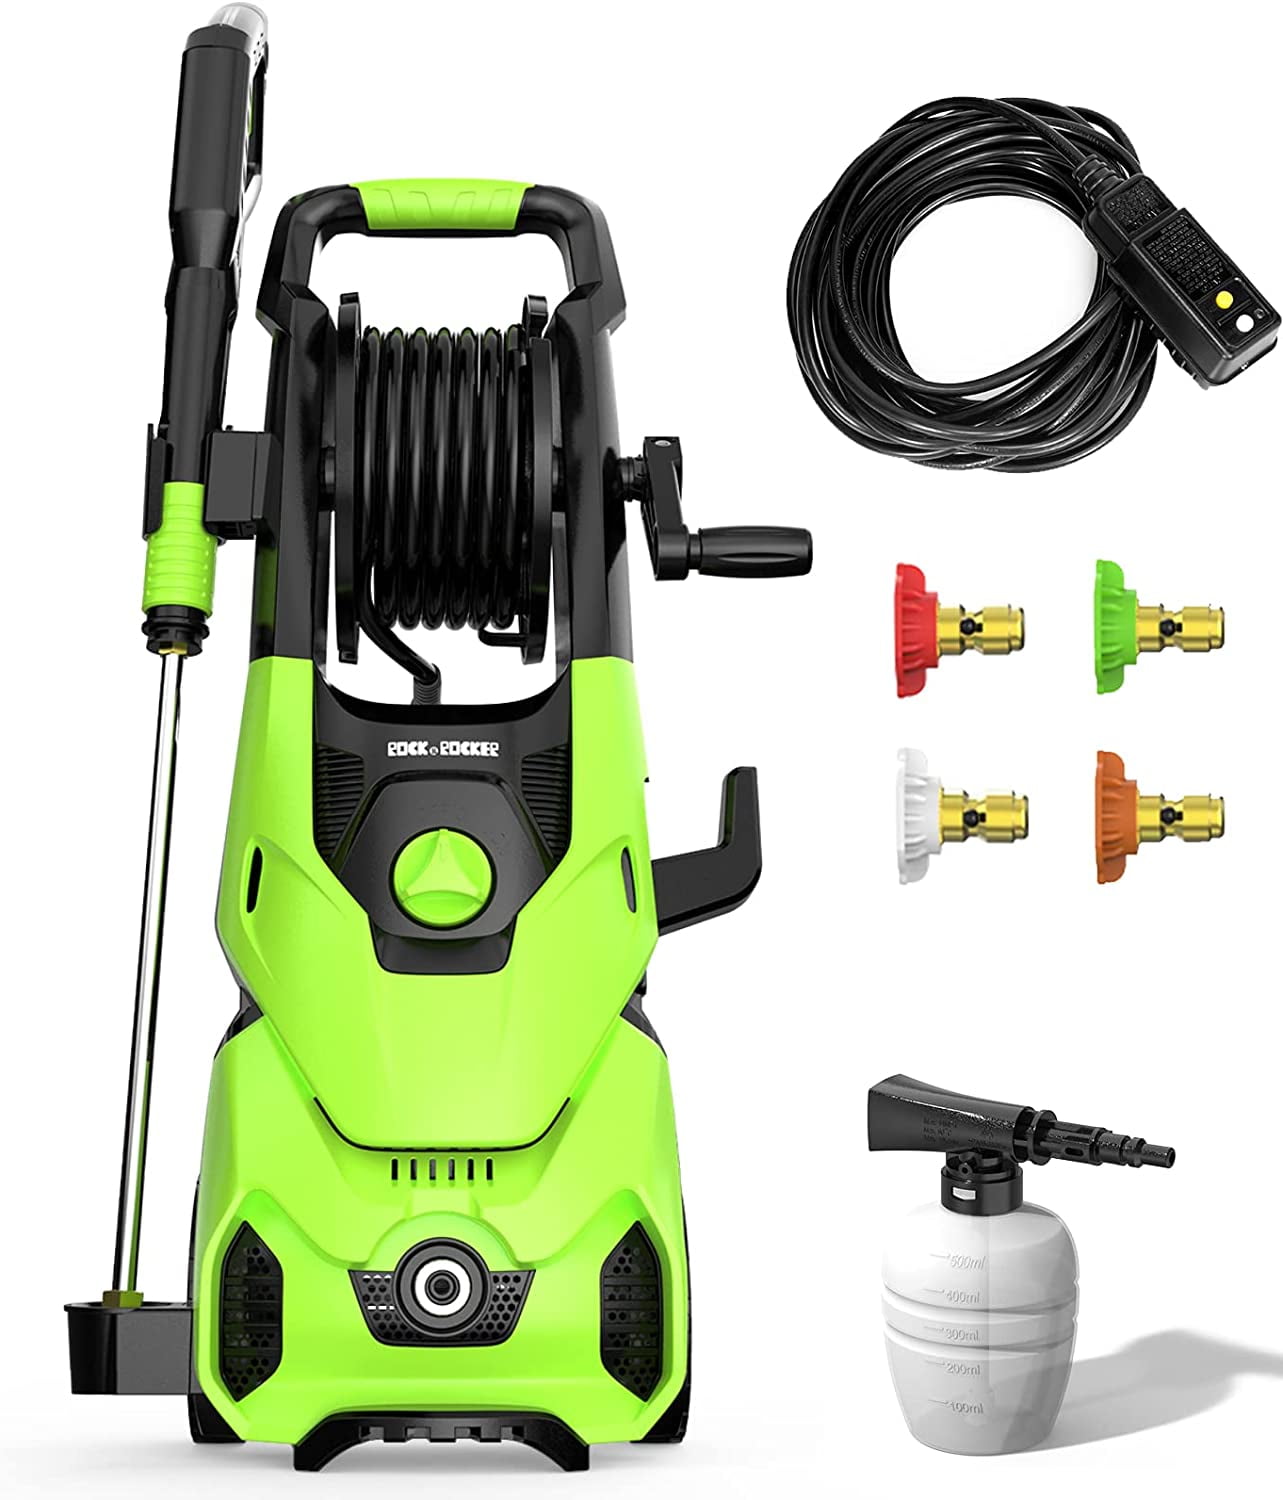 Rock&Rocker Powerful Electric Pressure Washer, 2150 PSI 1.85 GPM with Hose  Reel, 4 Quick Connect Nozzles, Soap Tank, IPX5 Car Wash Machine Power  Washer 